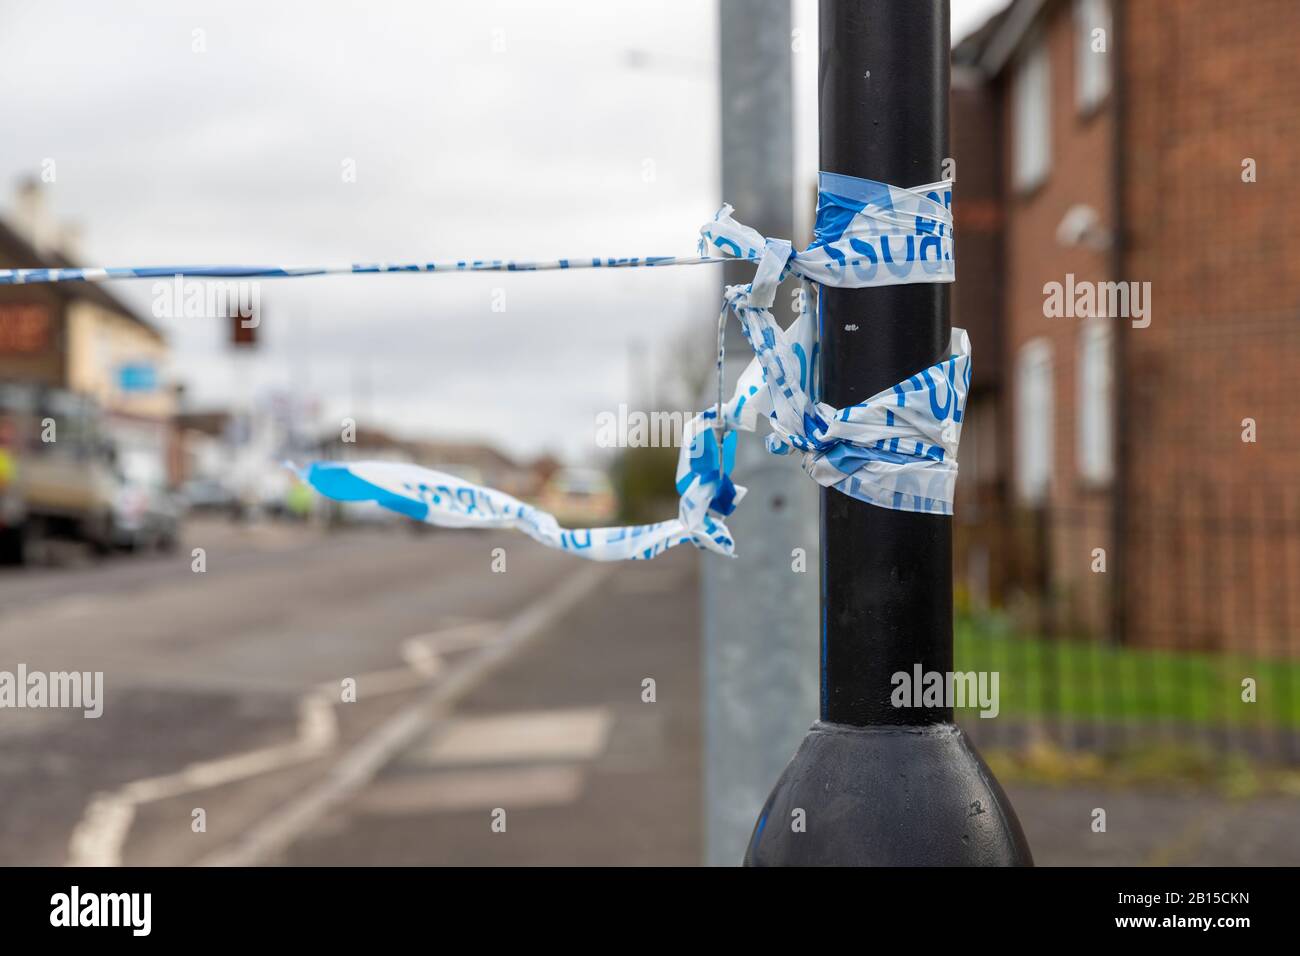 Aveley, Essex, UK. 23rd Feb 2020. Police and forensic officers investigate a road traffic collision/hit and run on Purfleet Road where a man in his 50's was struck by a vehicle which failed to stop. The man has been taken to hospital with serious and possibly life-changing injuries and Essex Police are appealing for witnesses. Credit: Ricci Fothergill/Alamy Live News Stock Photo